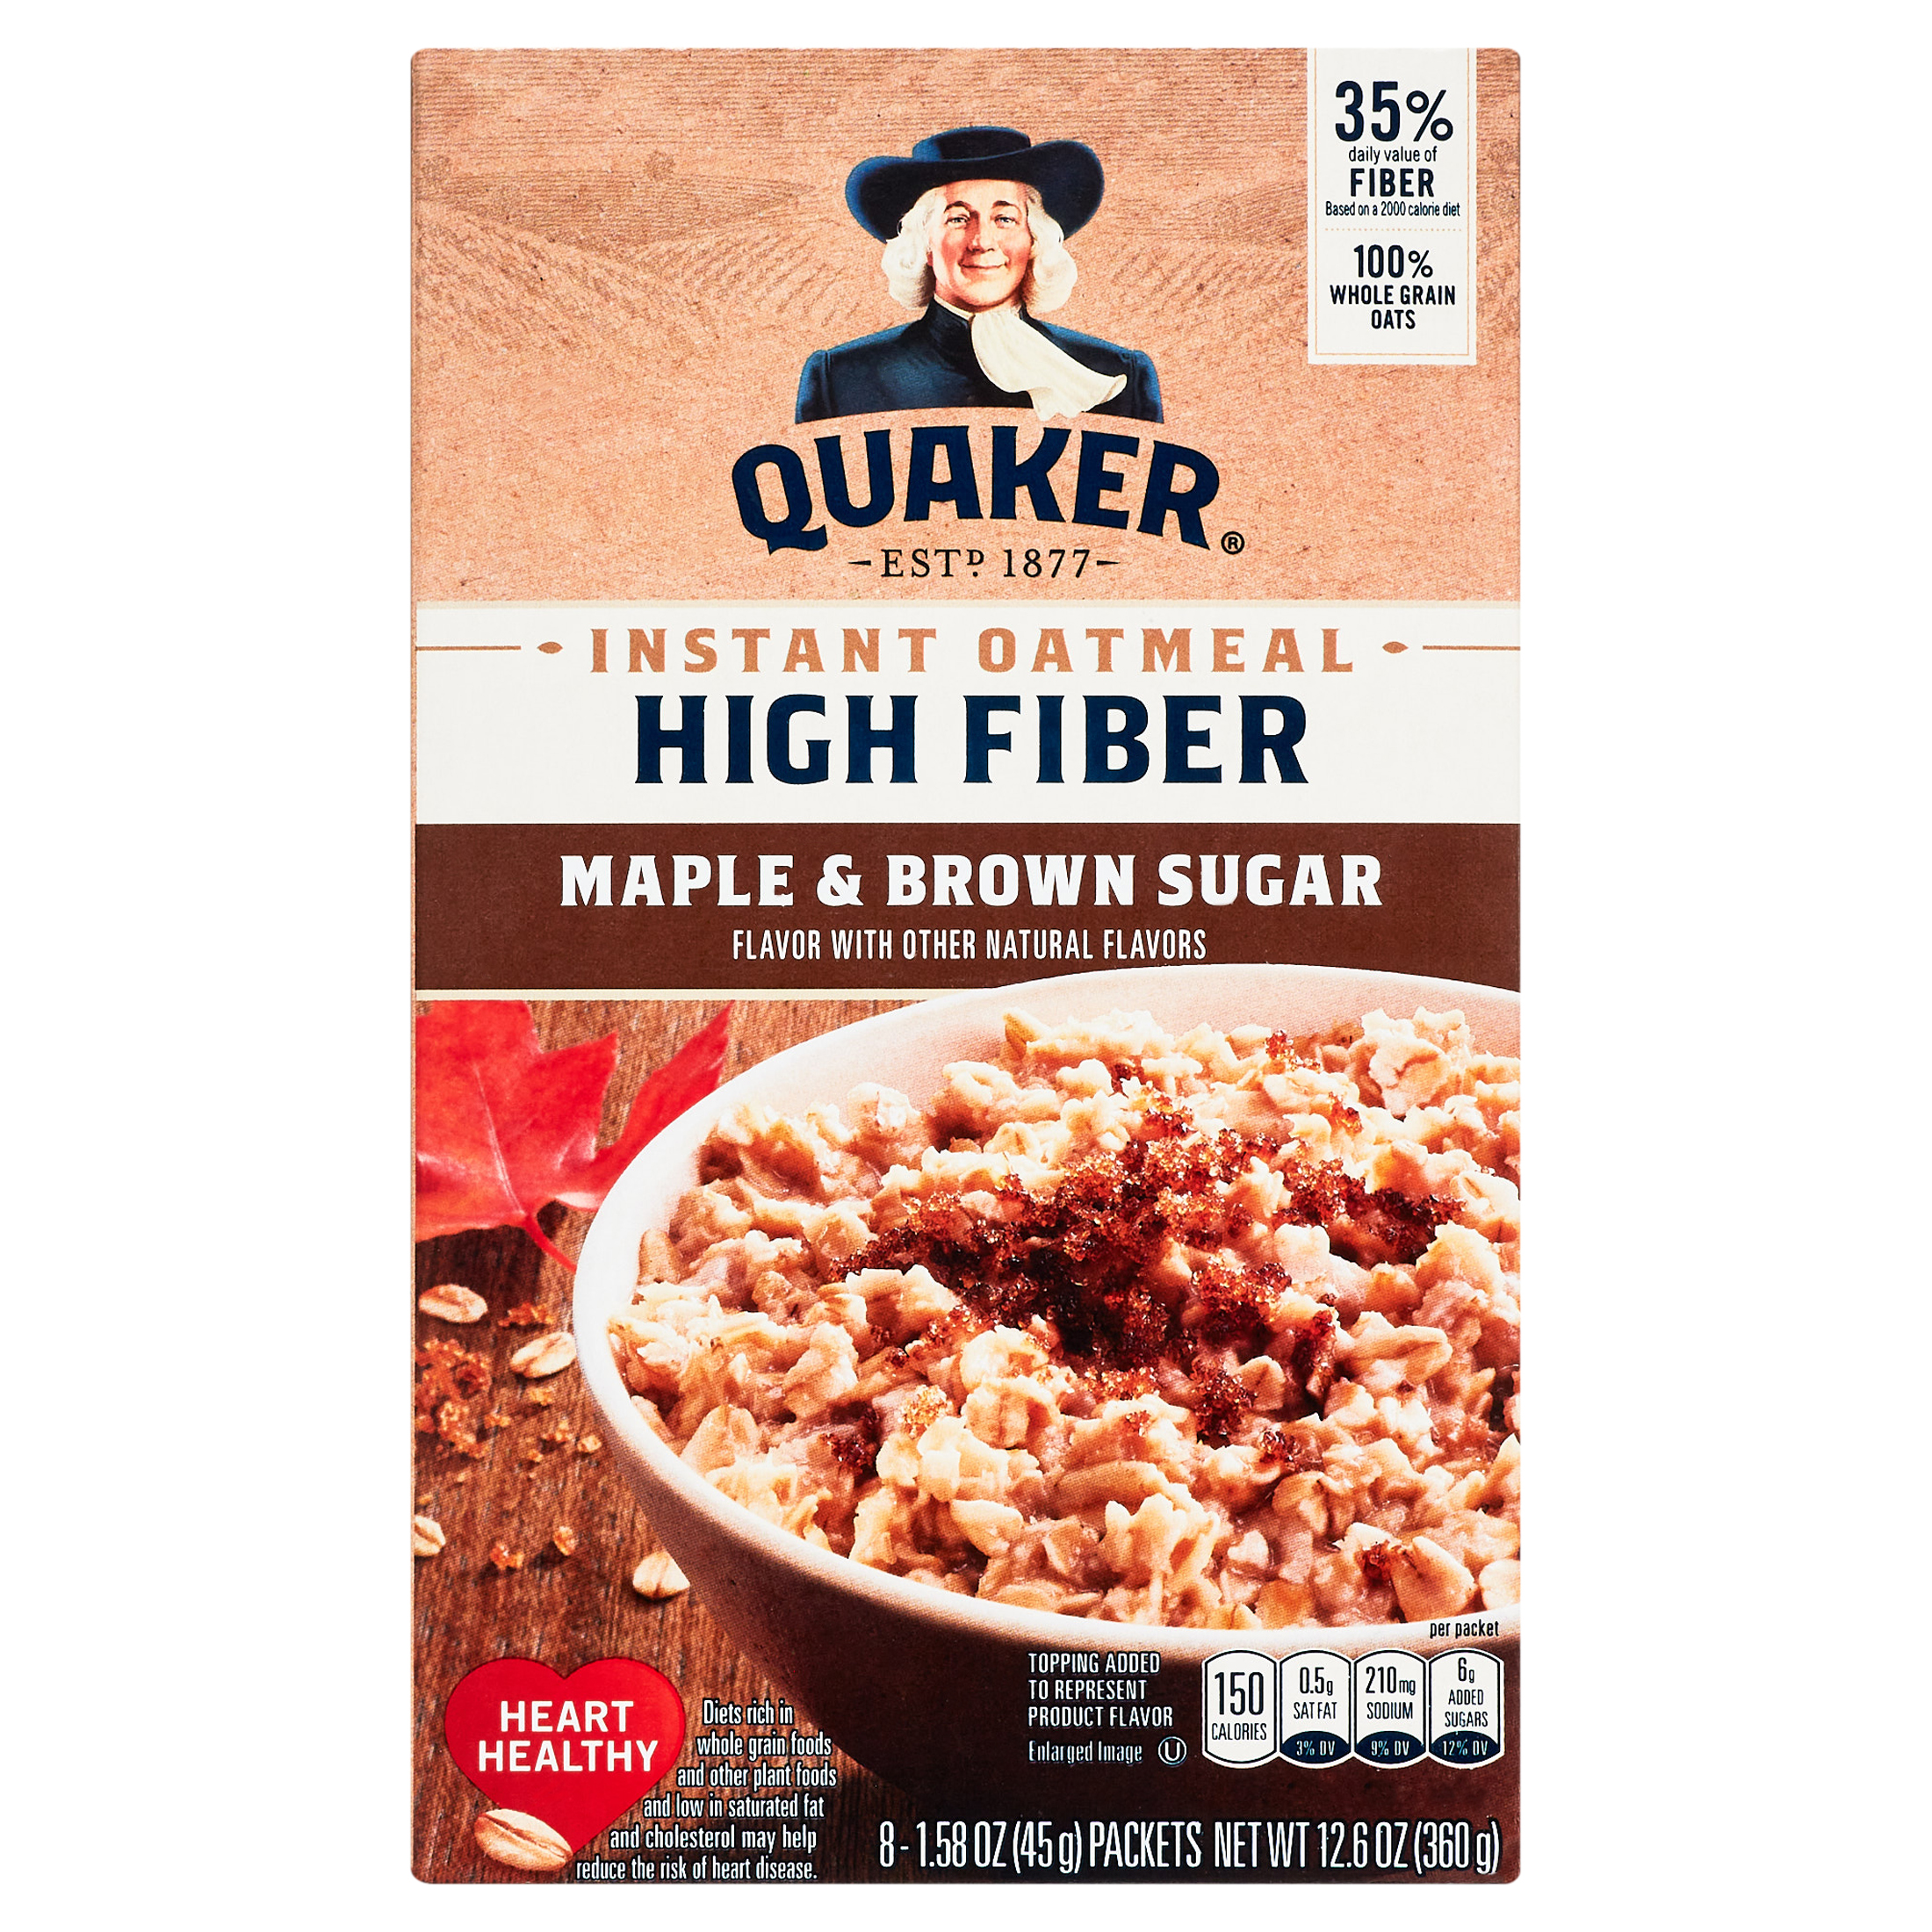 Quaker, High Fiber Instant Oatmeal, Maple & Brown Sugar, 1.58 oz, 8 Packets - image 1 of 13